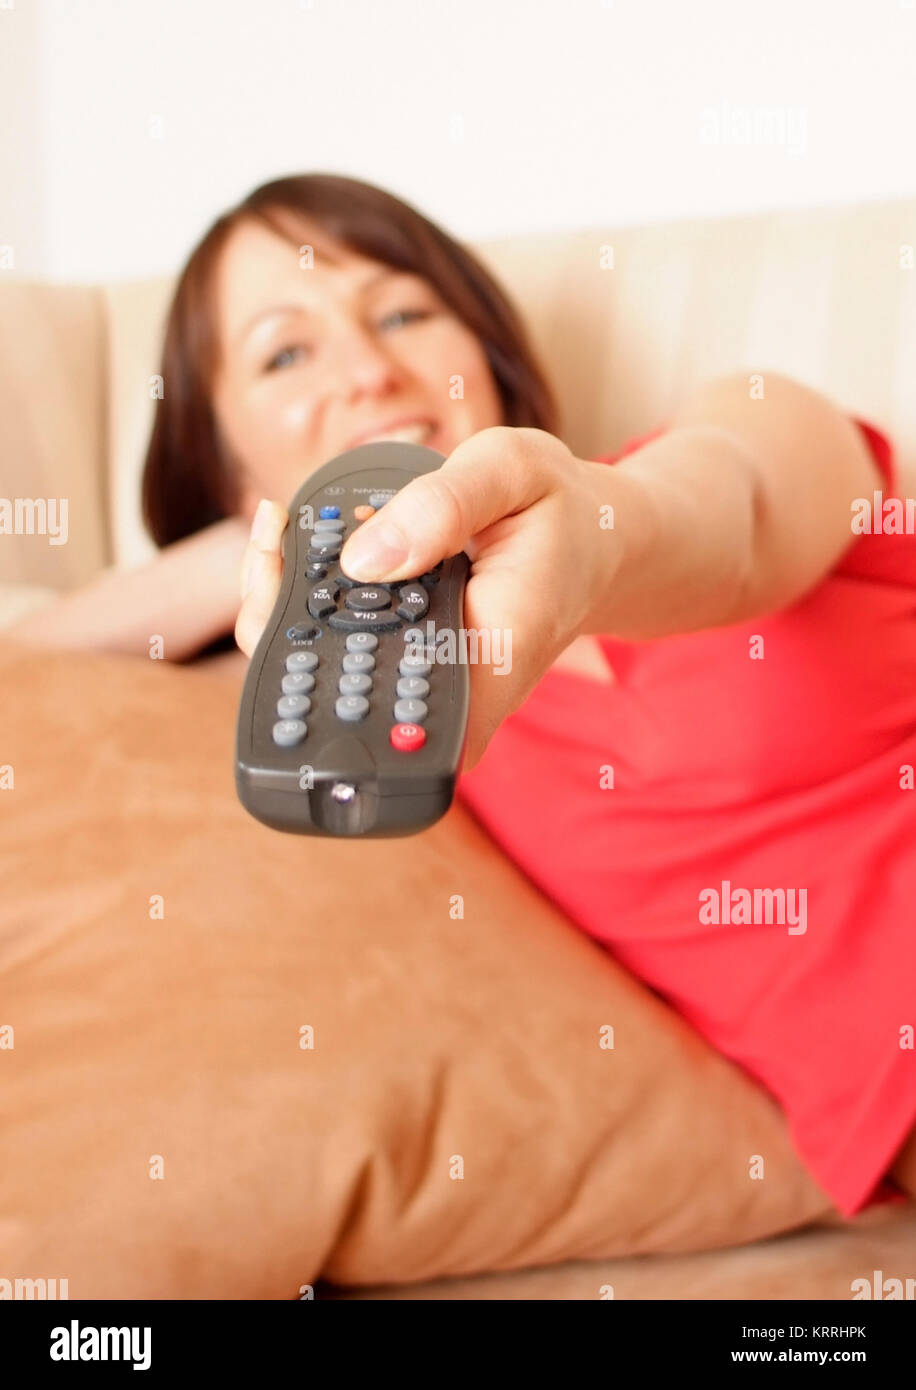 Junge Frau liegt mit Fernbedienung auf Couch - young woman with remote control on couch Stock Photo